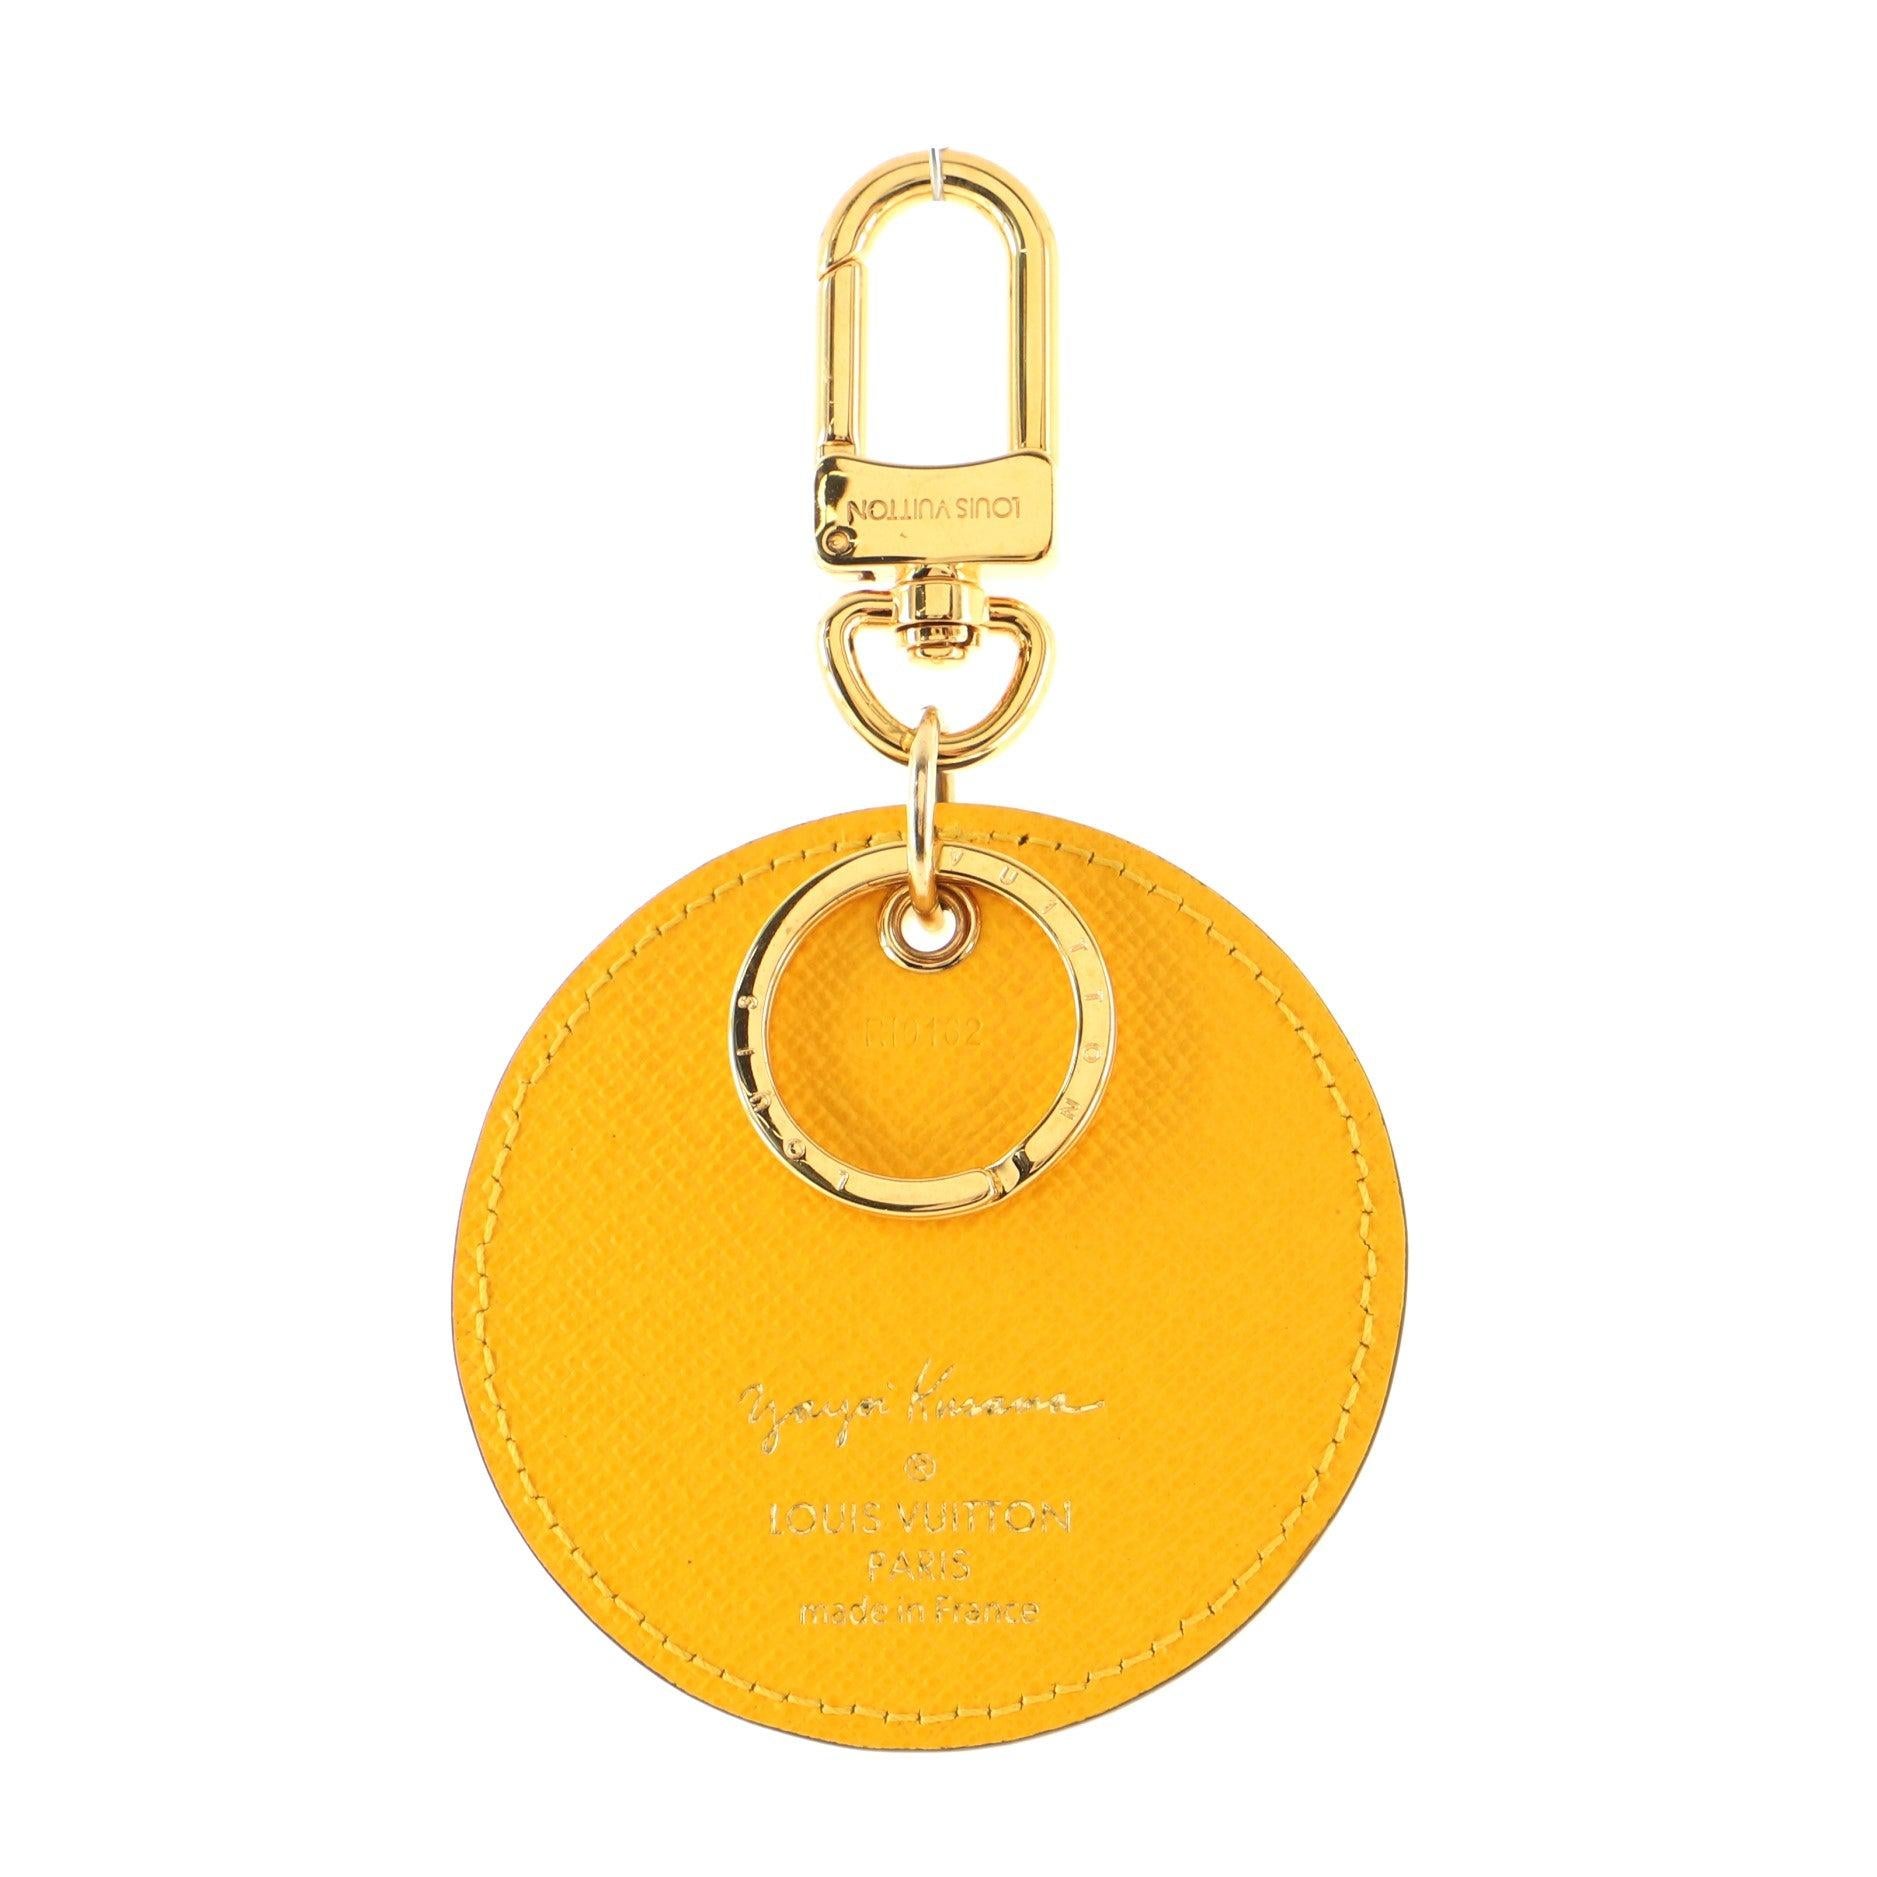 Louis Vuitton Yellow Yayoi Kusama Pumpkin Dots Monogram Limited Edition Round Key Holder features gold-tone hardware with canvas coated leather and yellow pumpkin dots as a signature pattern from artist Yayoi Kusama.

 

63769MSC